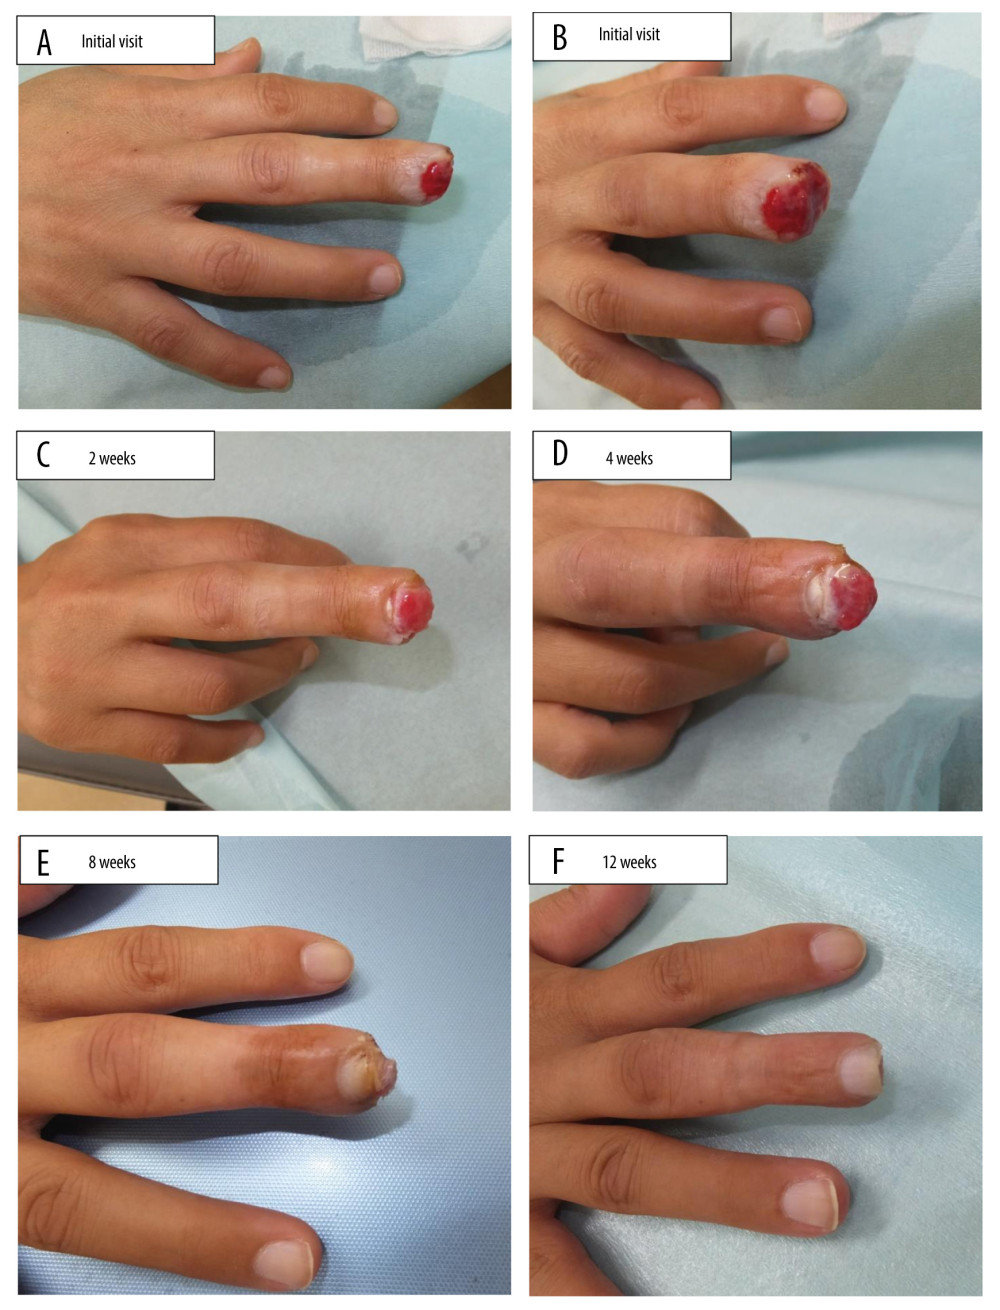 Wound healing process from initial visit to epithelialization Initial presentation of fingertip amputation injury on the third finger of the right hand. The distal phalanx of the finger is exposed during the initial visit (A, B). Granulation increased at 2 weeks (C). The tip regained a shape similar to that of the original finger at 4 weeks (D). Epithelialization was near completion at 8 weeks (E). Complete epithelialization at 12 weeks (F).